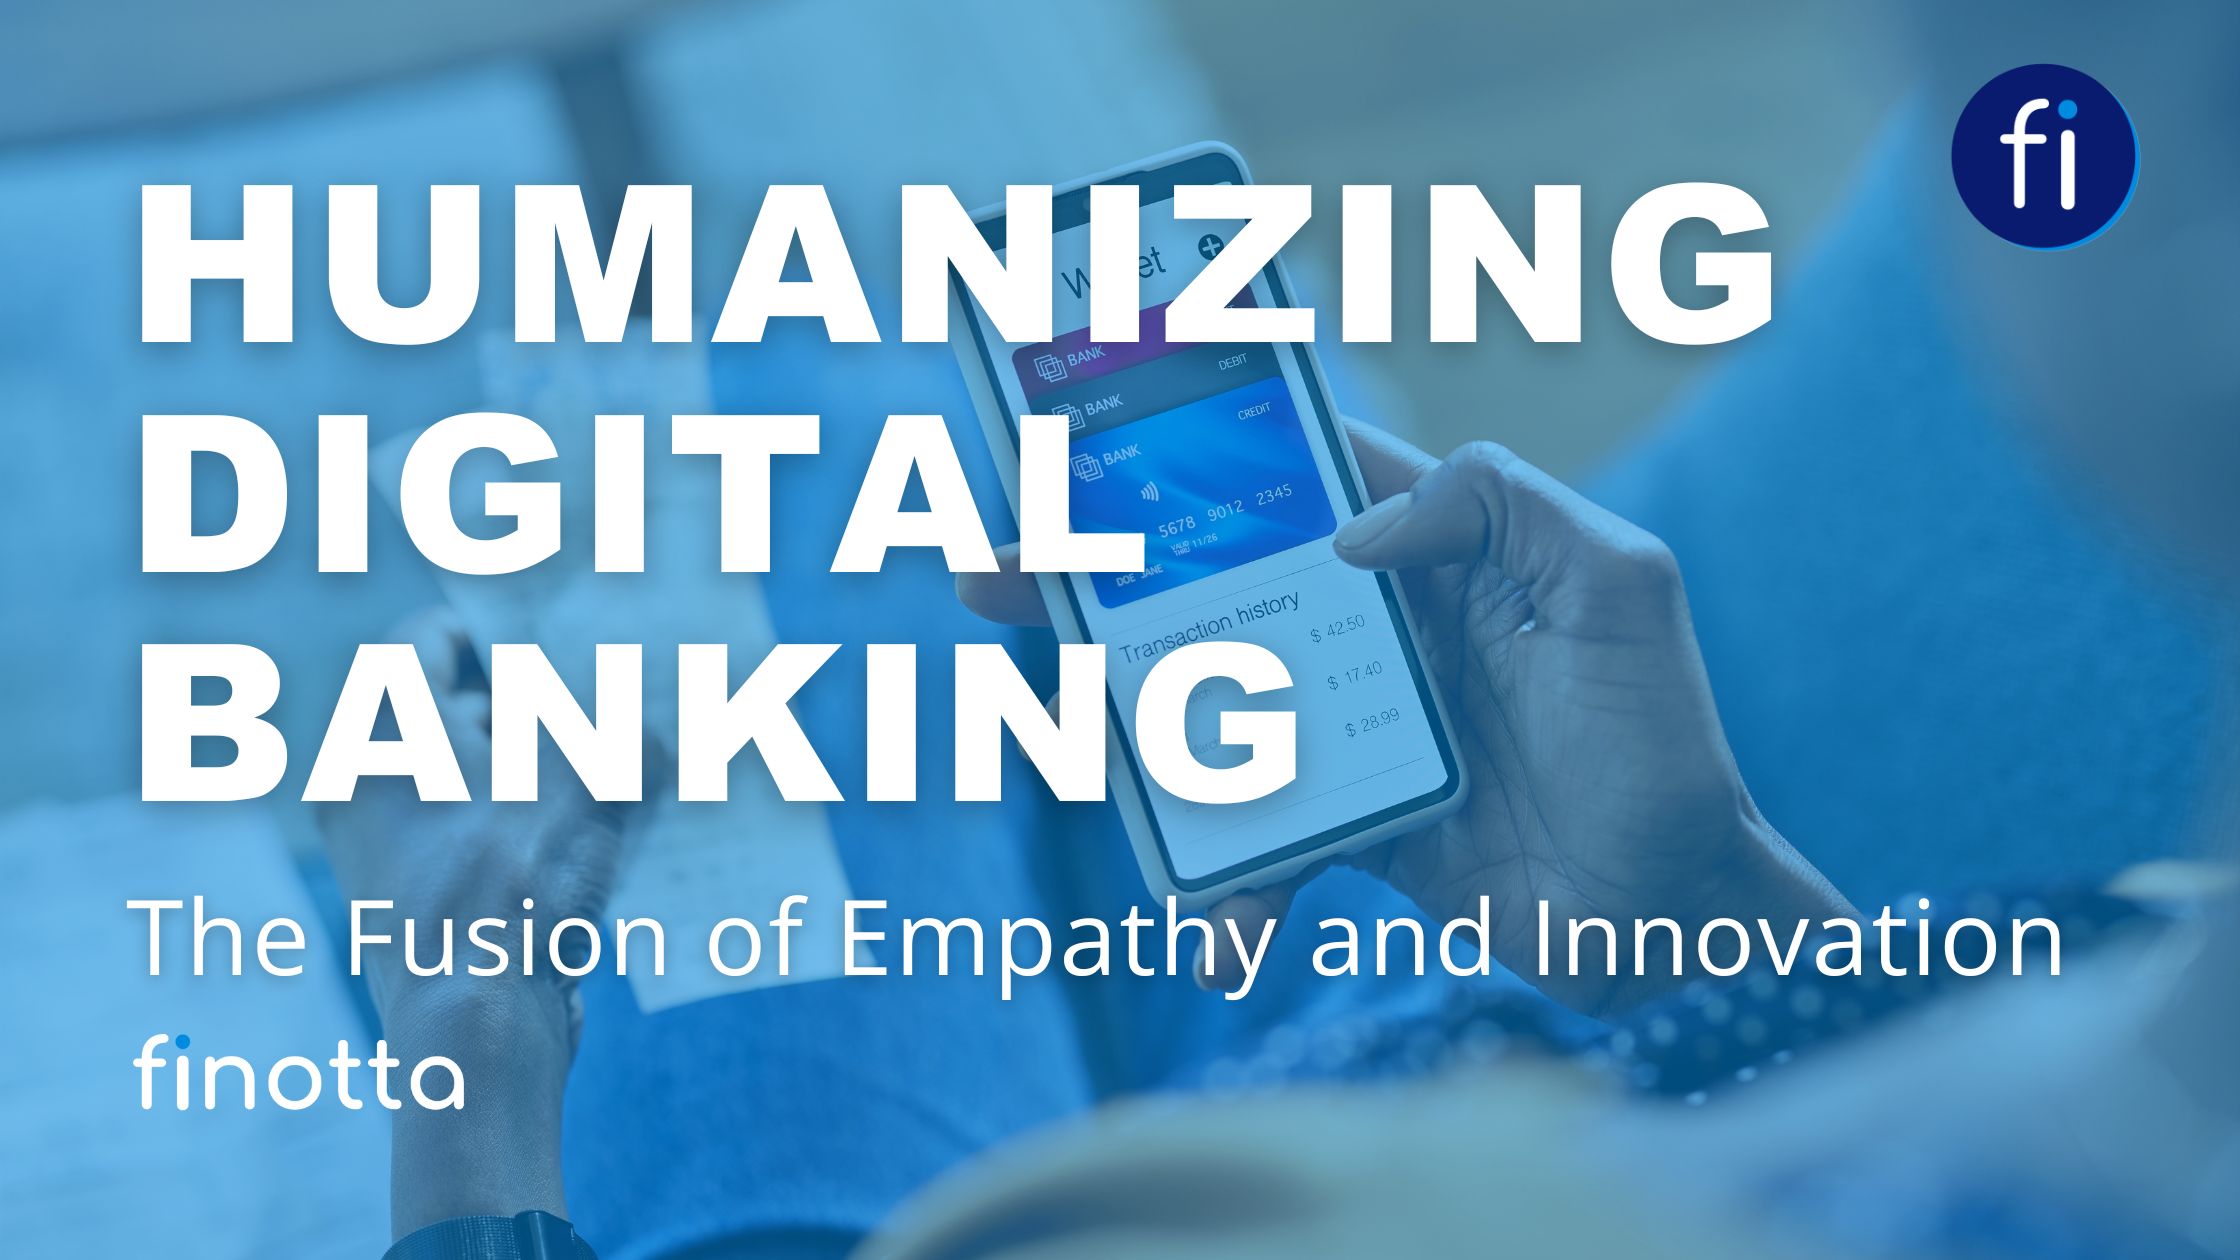 Humanizing Digital Banking: The Fusion of Empathy and Innovation